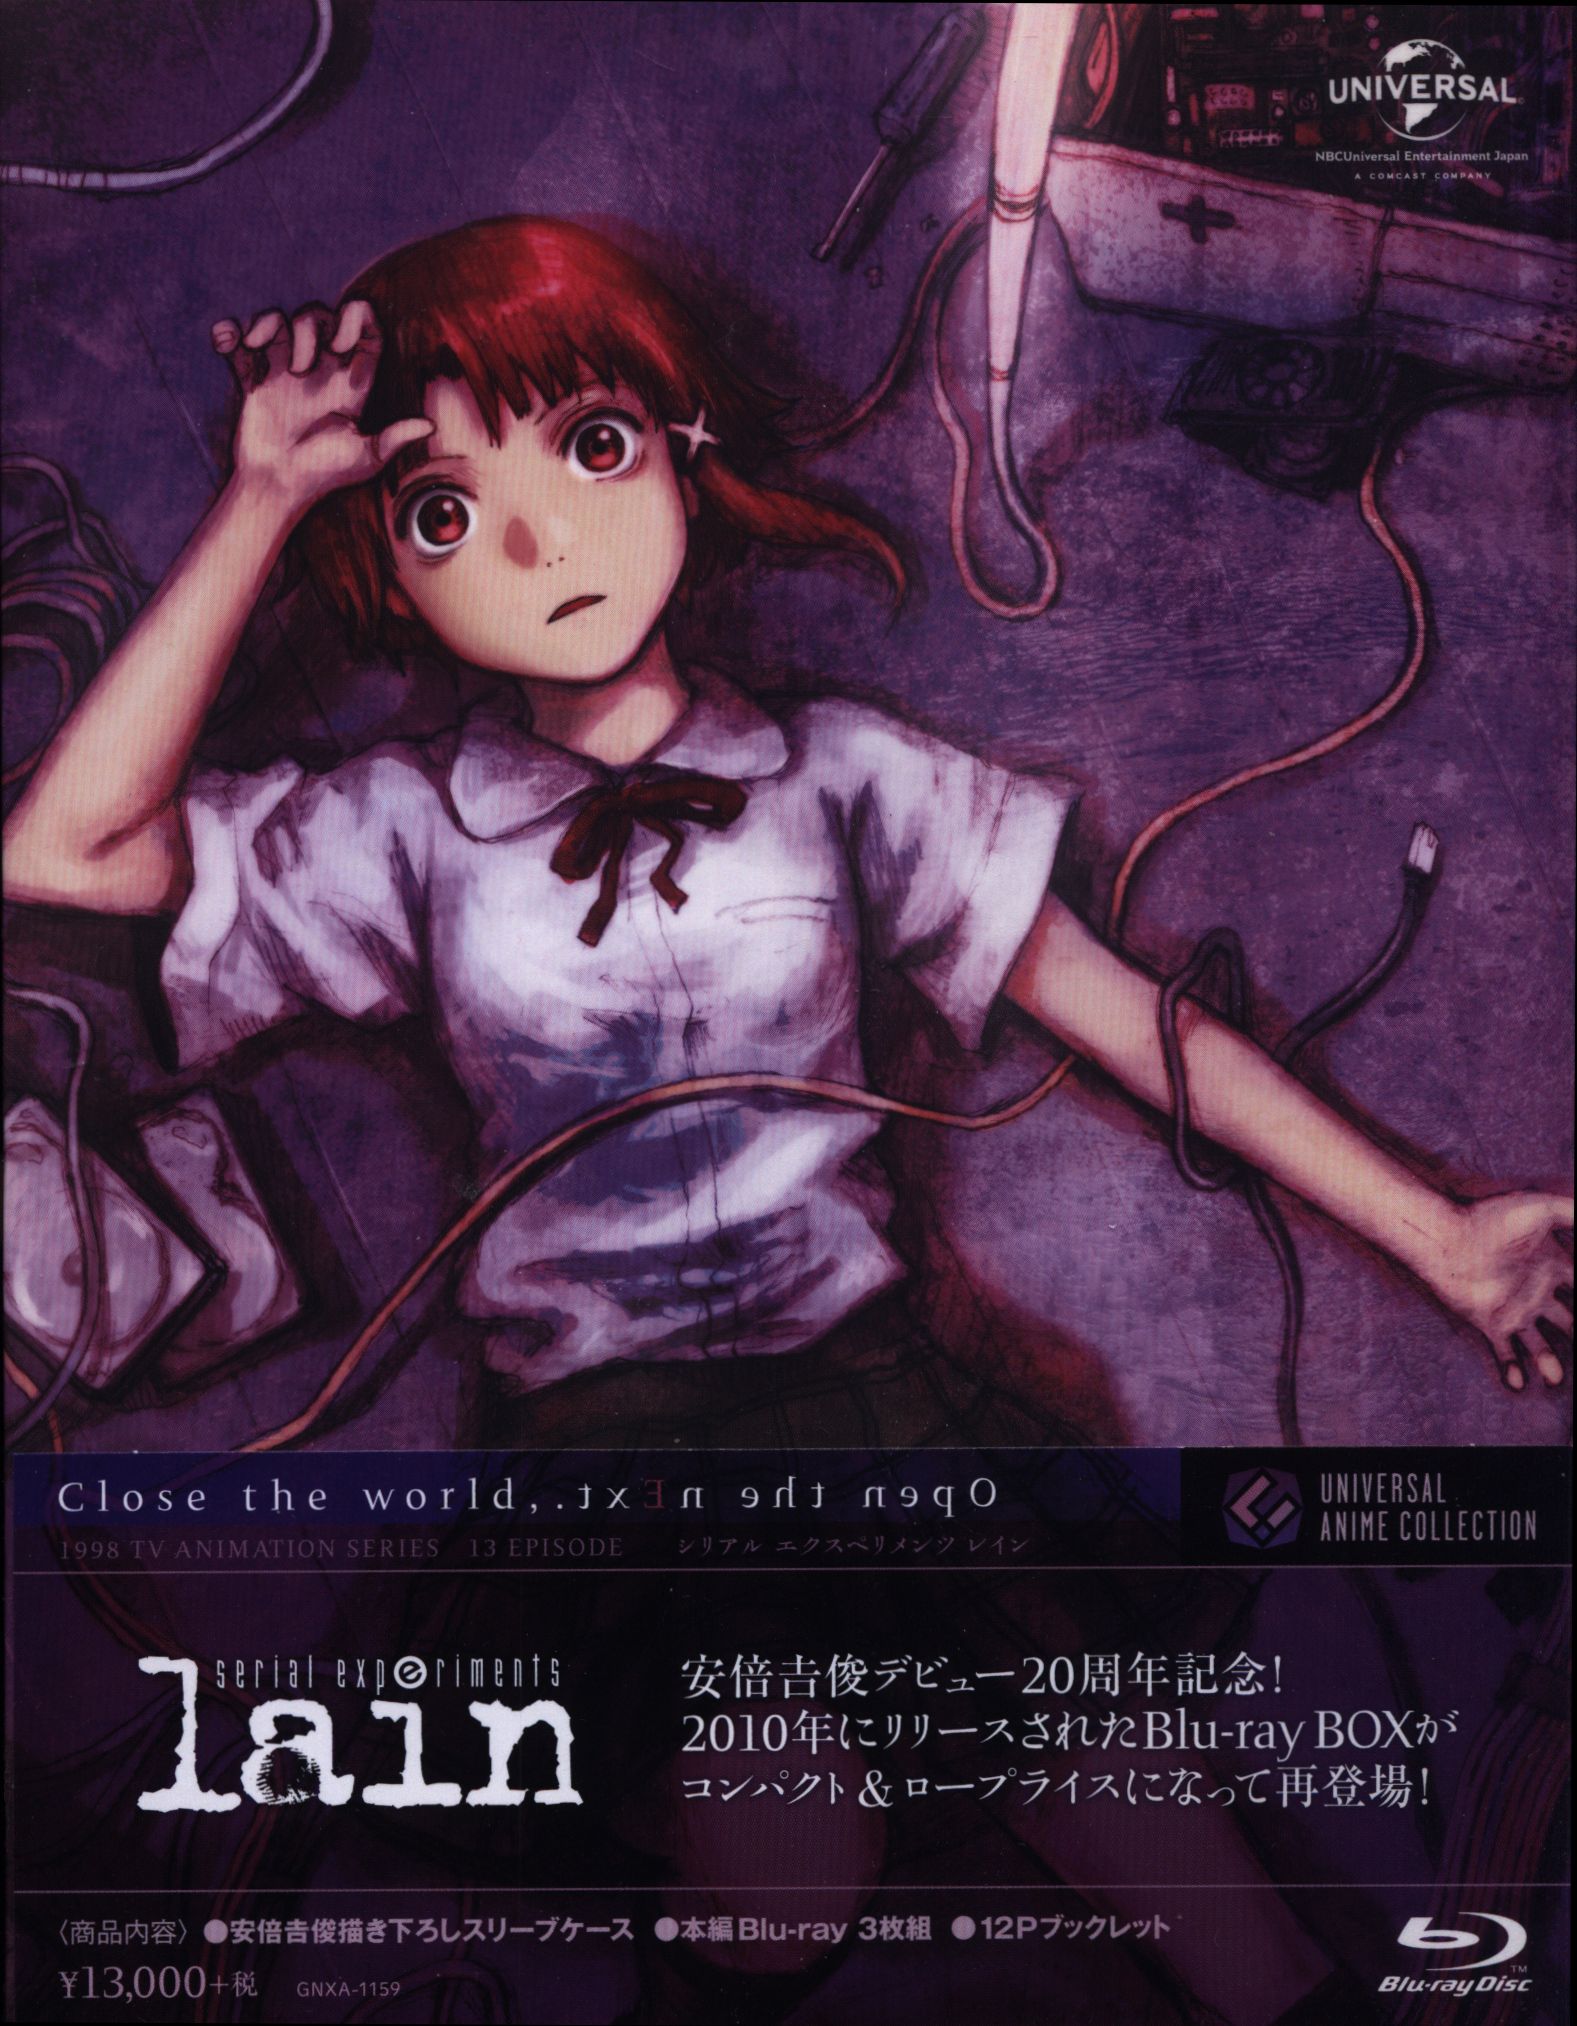 anime Blu-ray unopened 2015)serial experiments lain Blu-ray